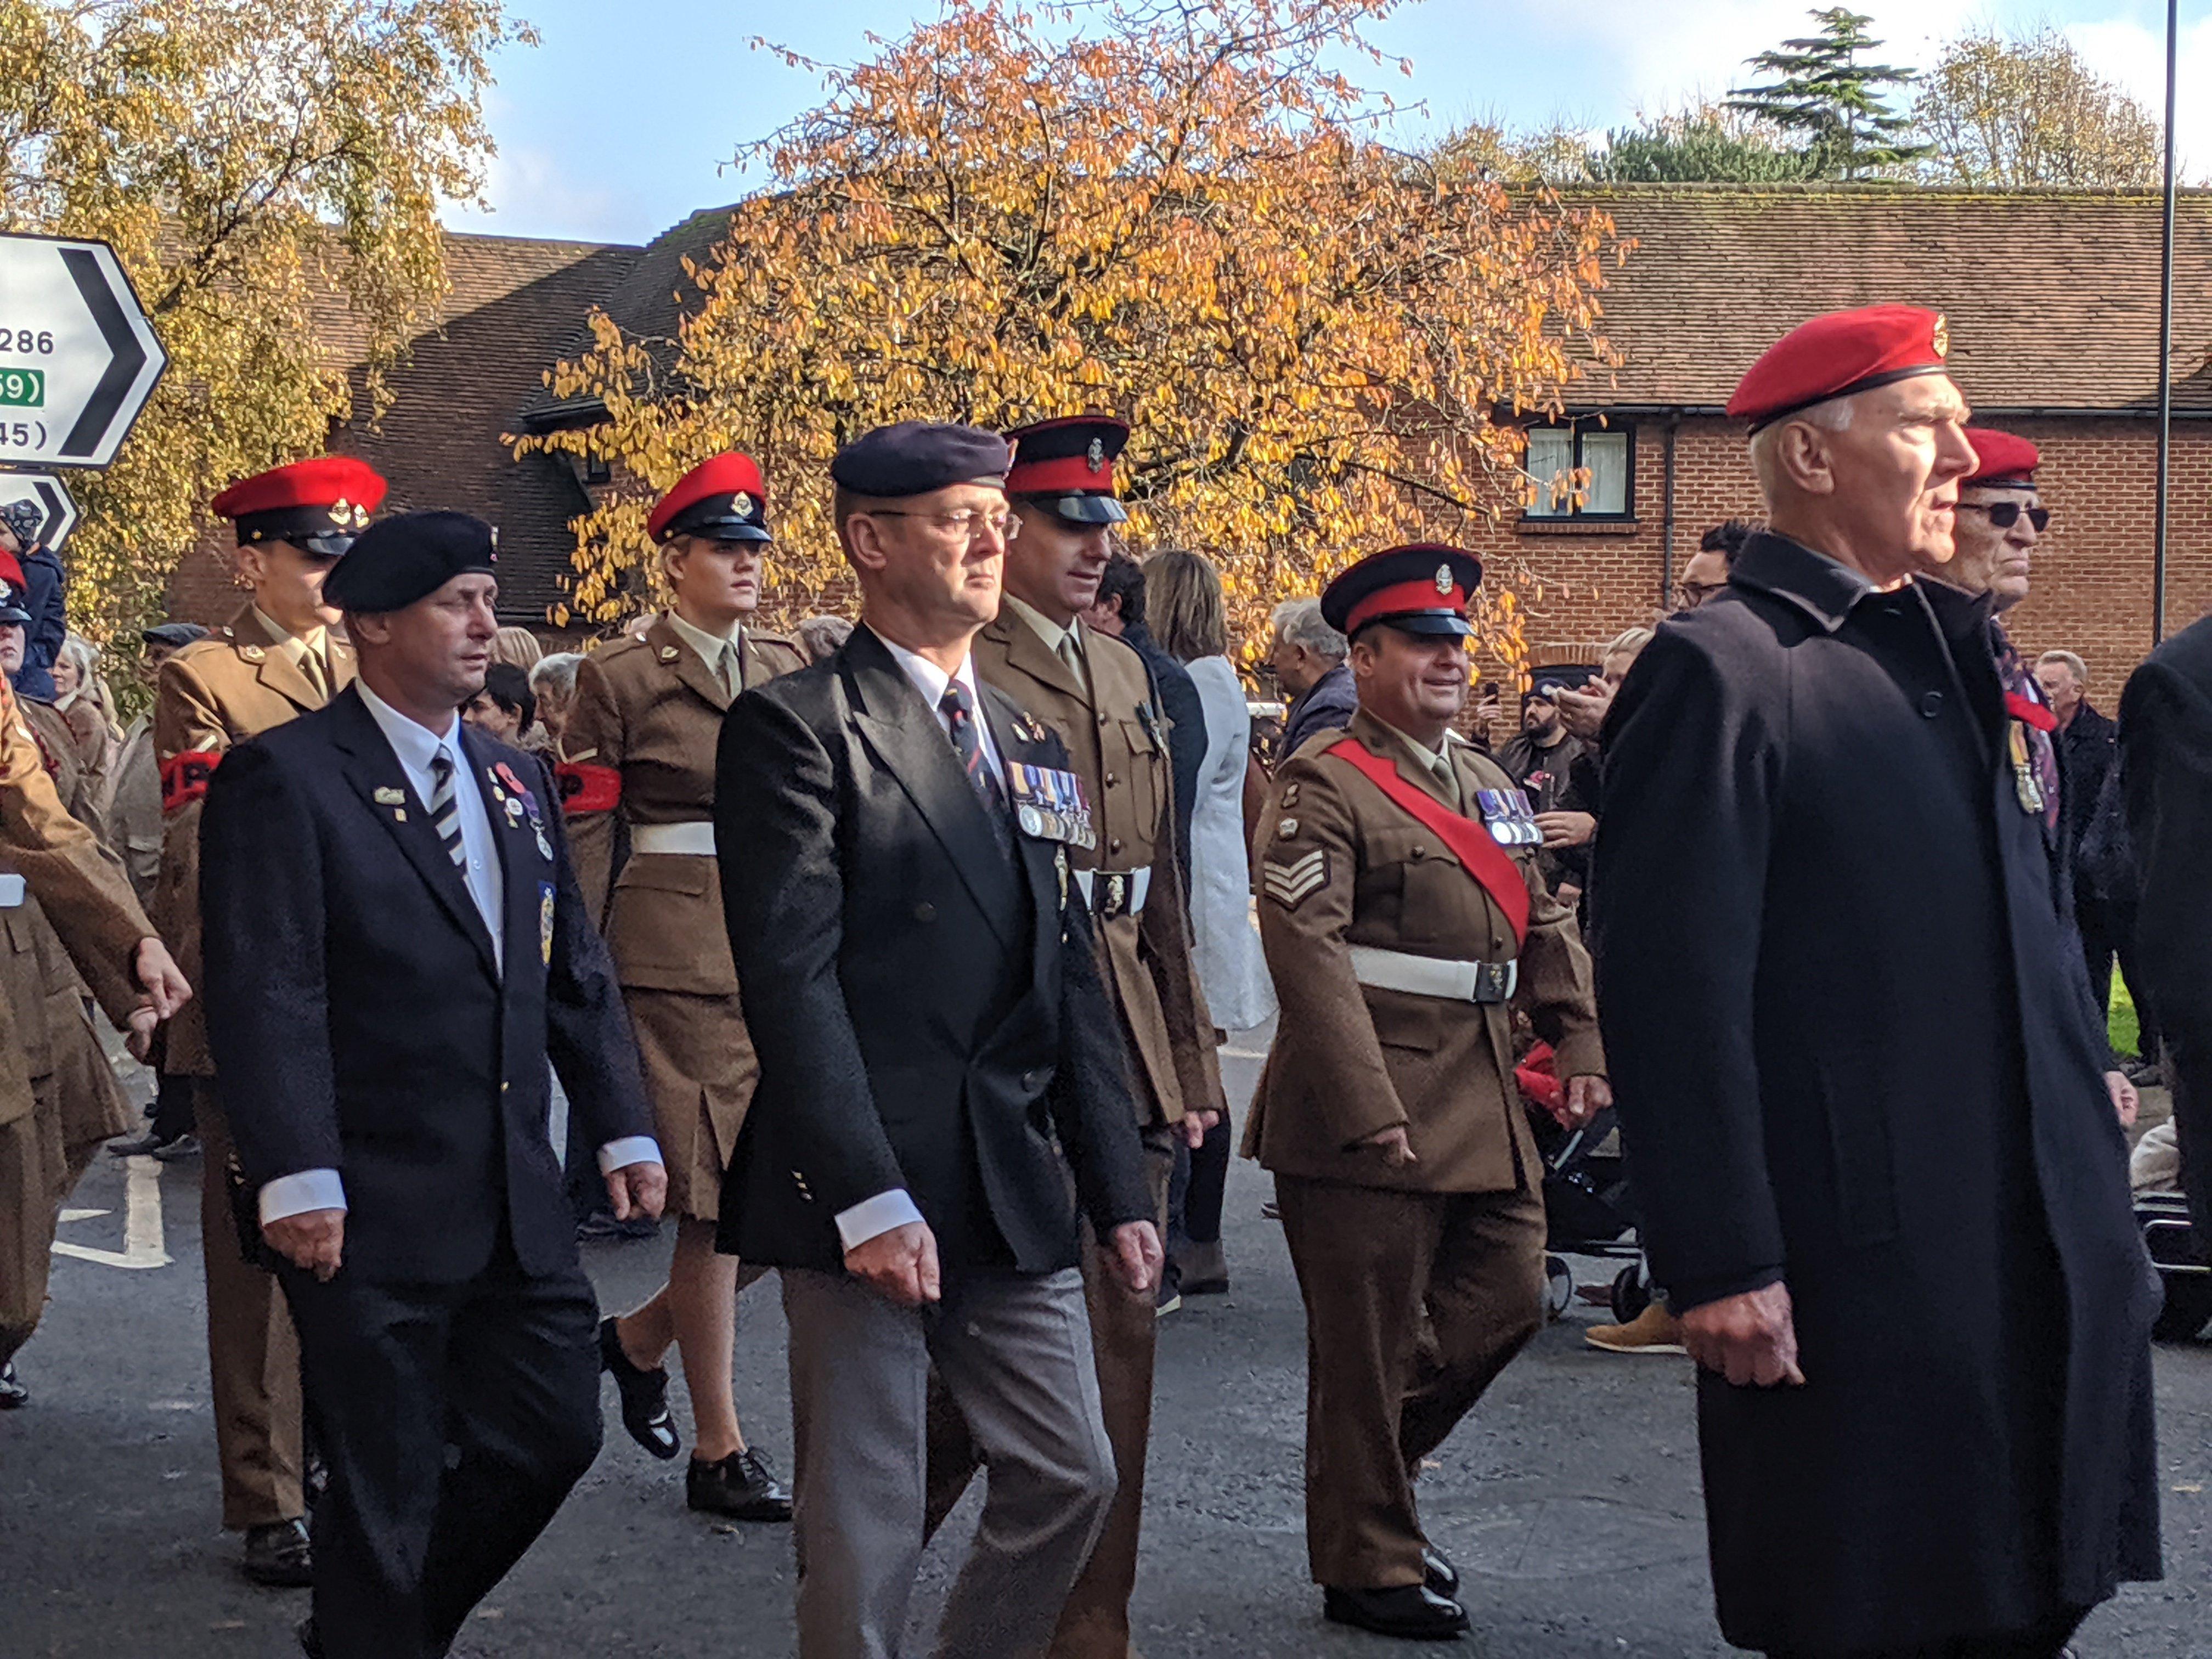 The Service was attended by service men and women, ex service representatives, and cadet, youth, and voluntary organisations